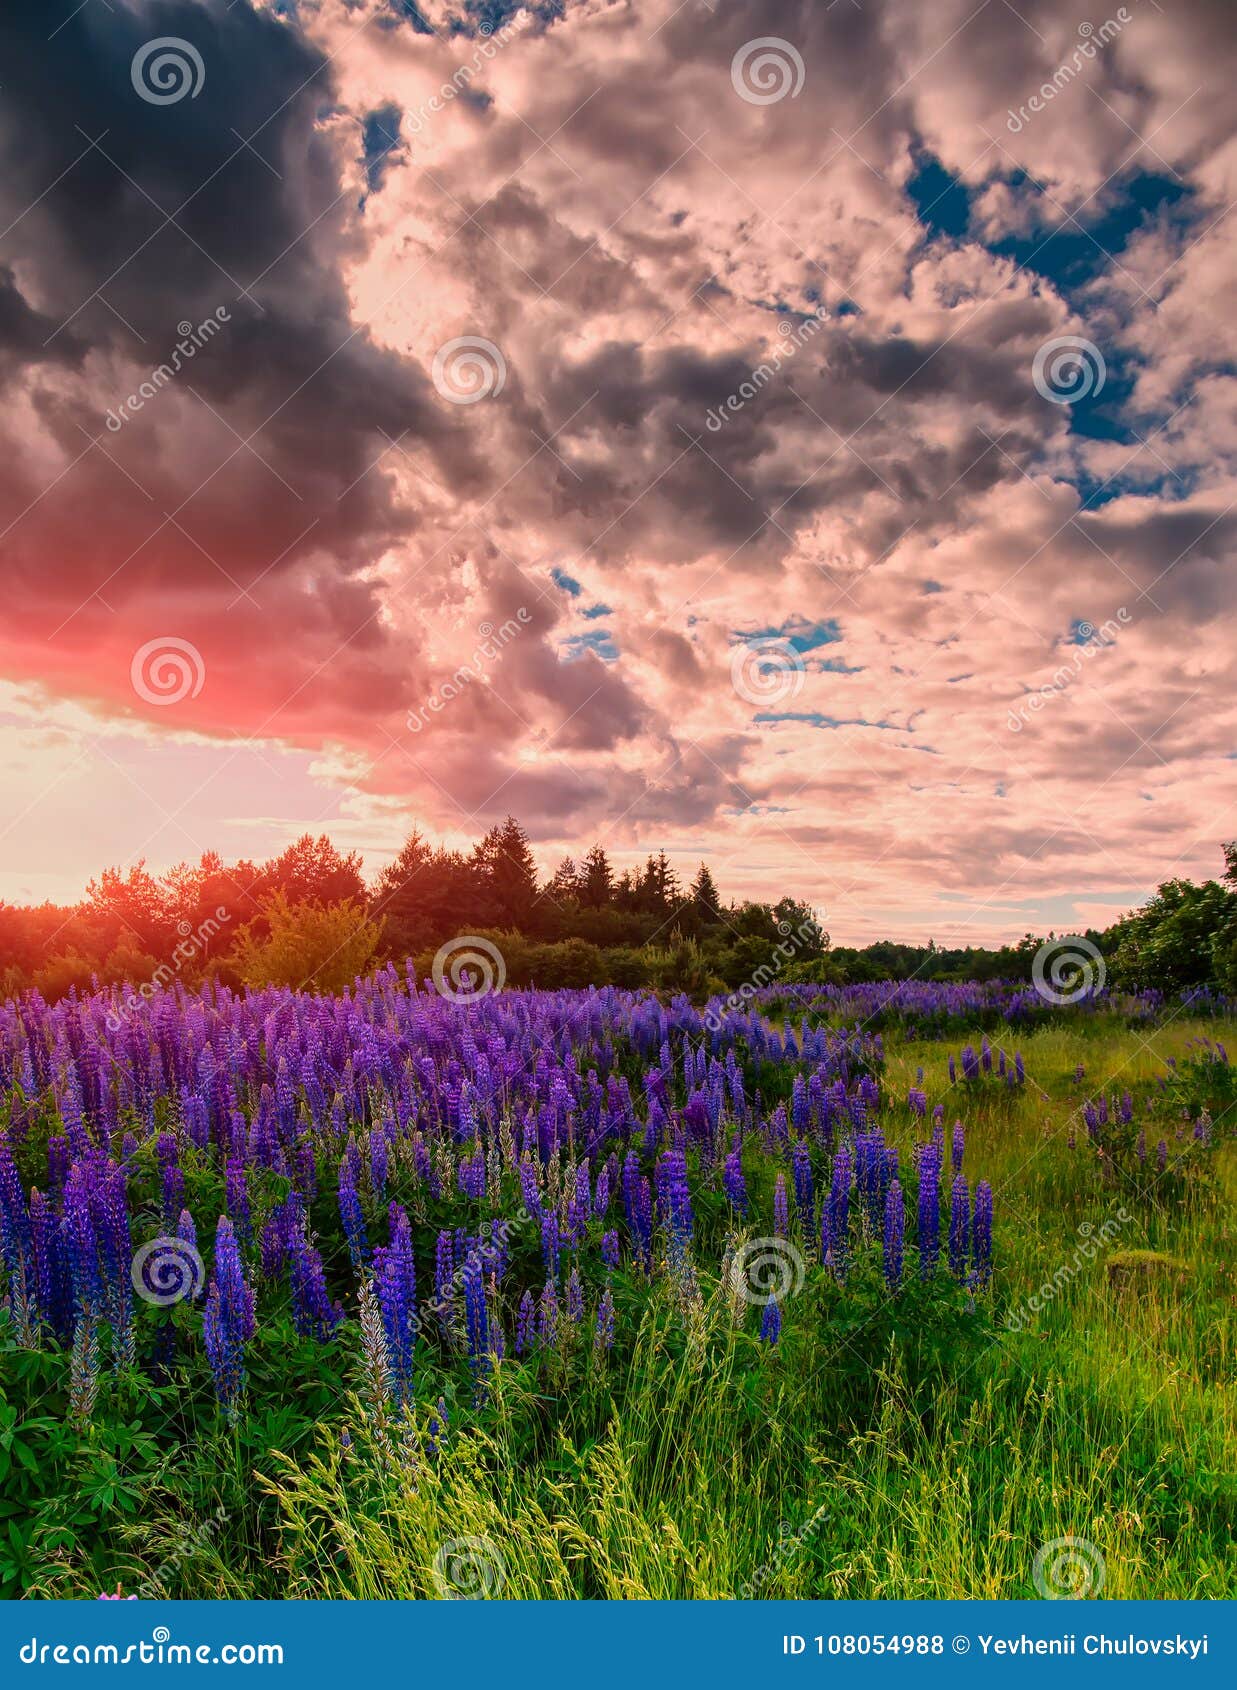 Lupine Flower On The Meadow Majestic Sky With Overcast Clouds Stock